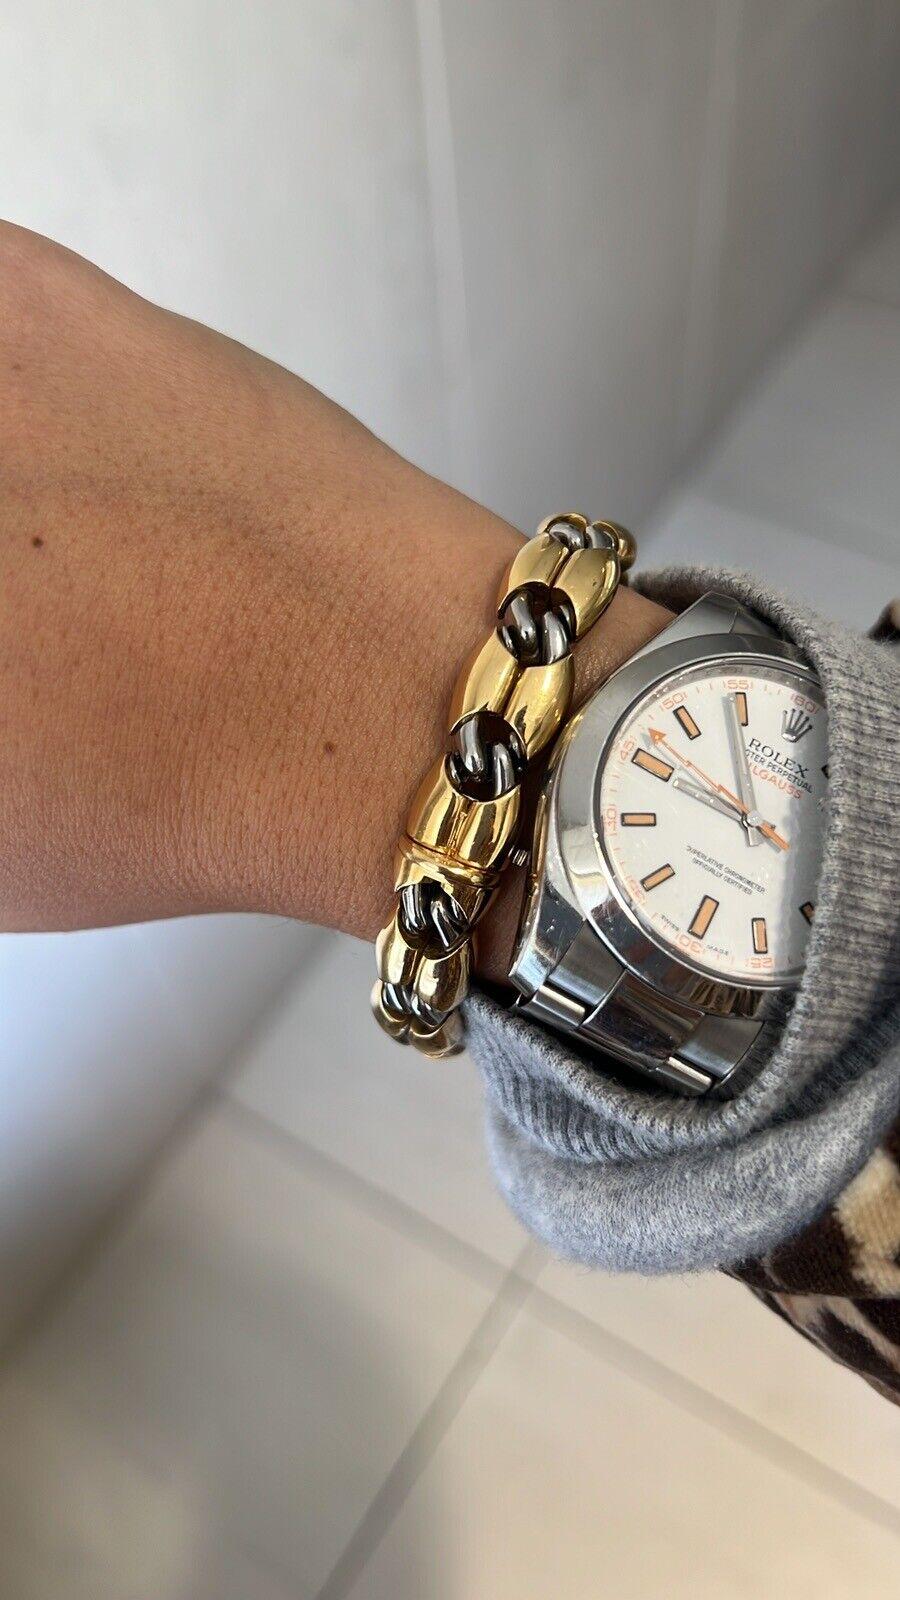 BVLGARI Made in France 18k Yellow Gold & Stainless Steel Bracelet Circa 1980s For Sale 4